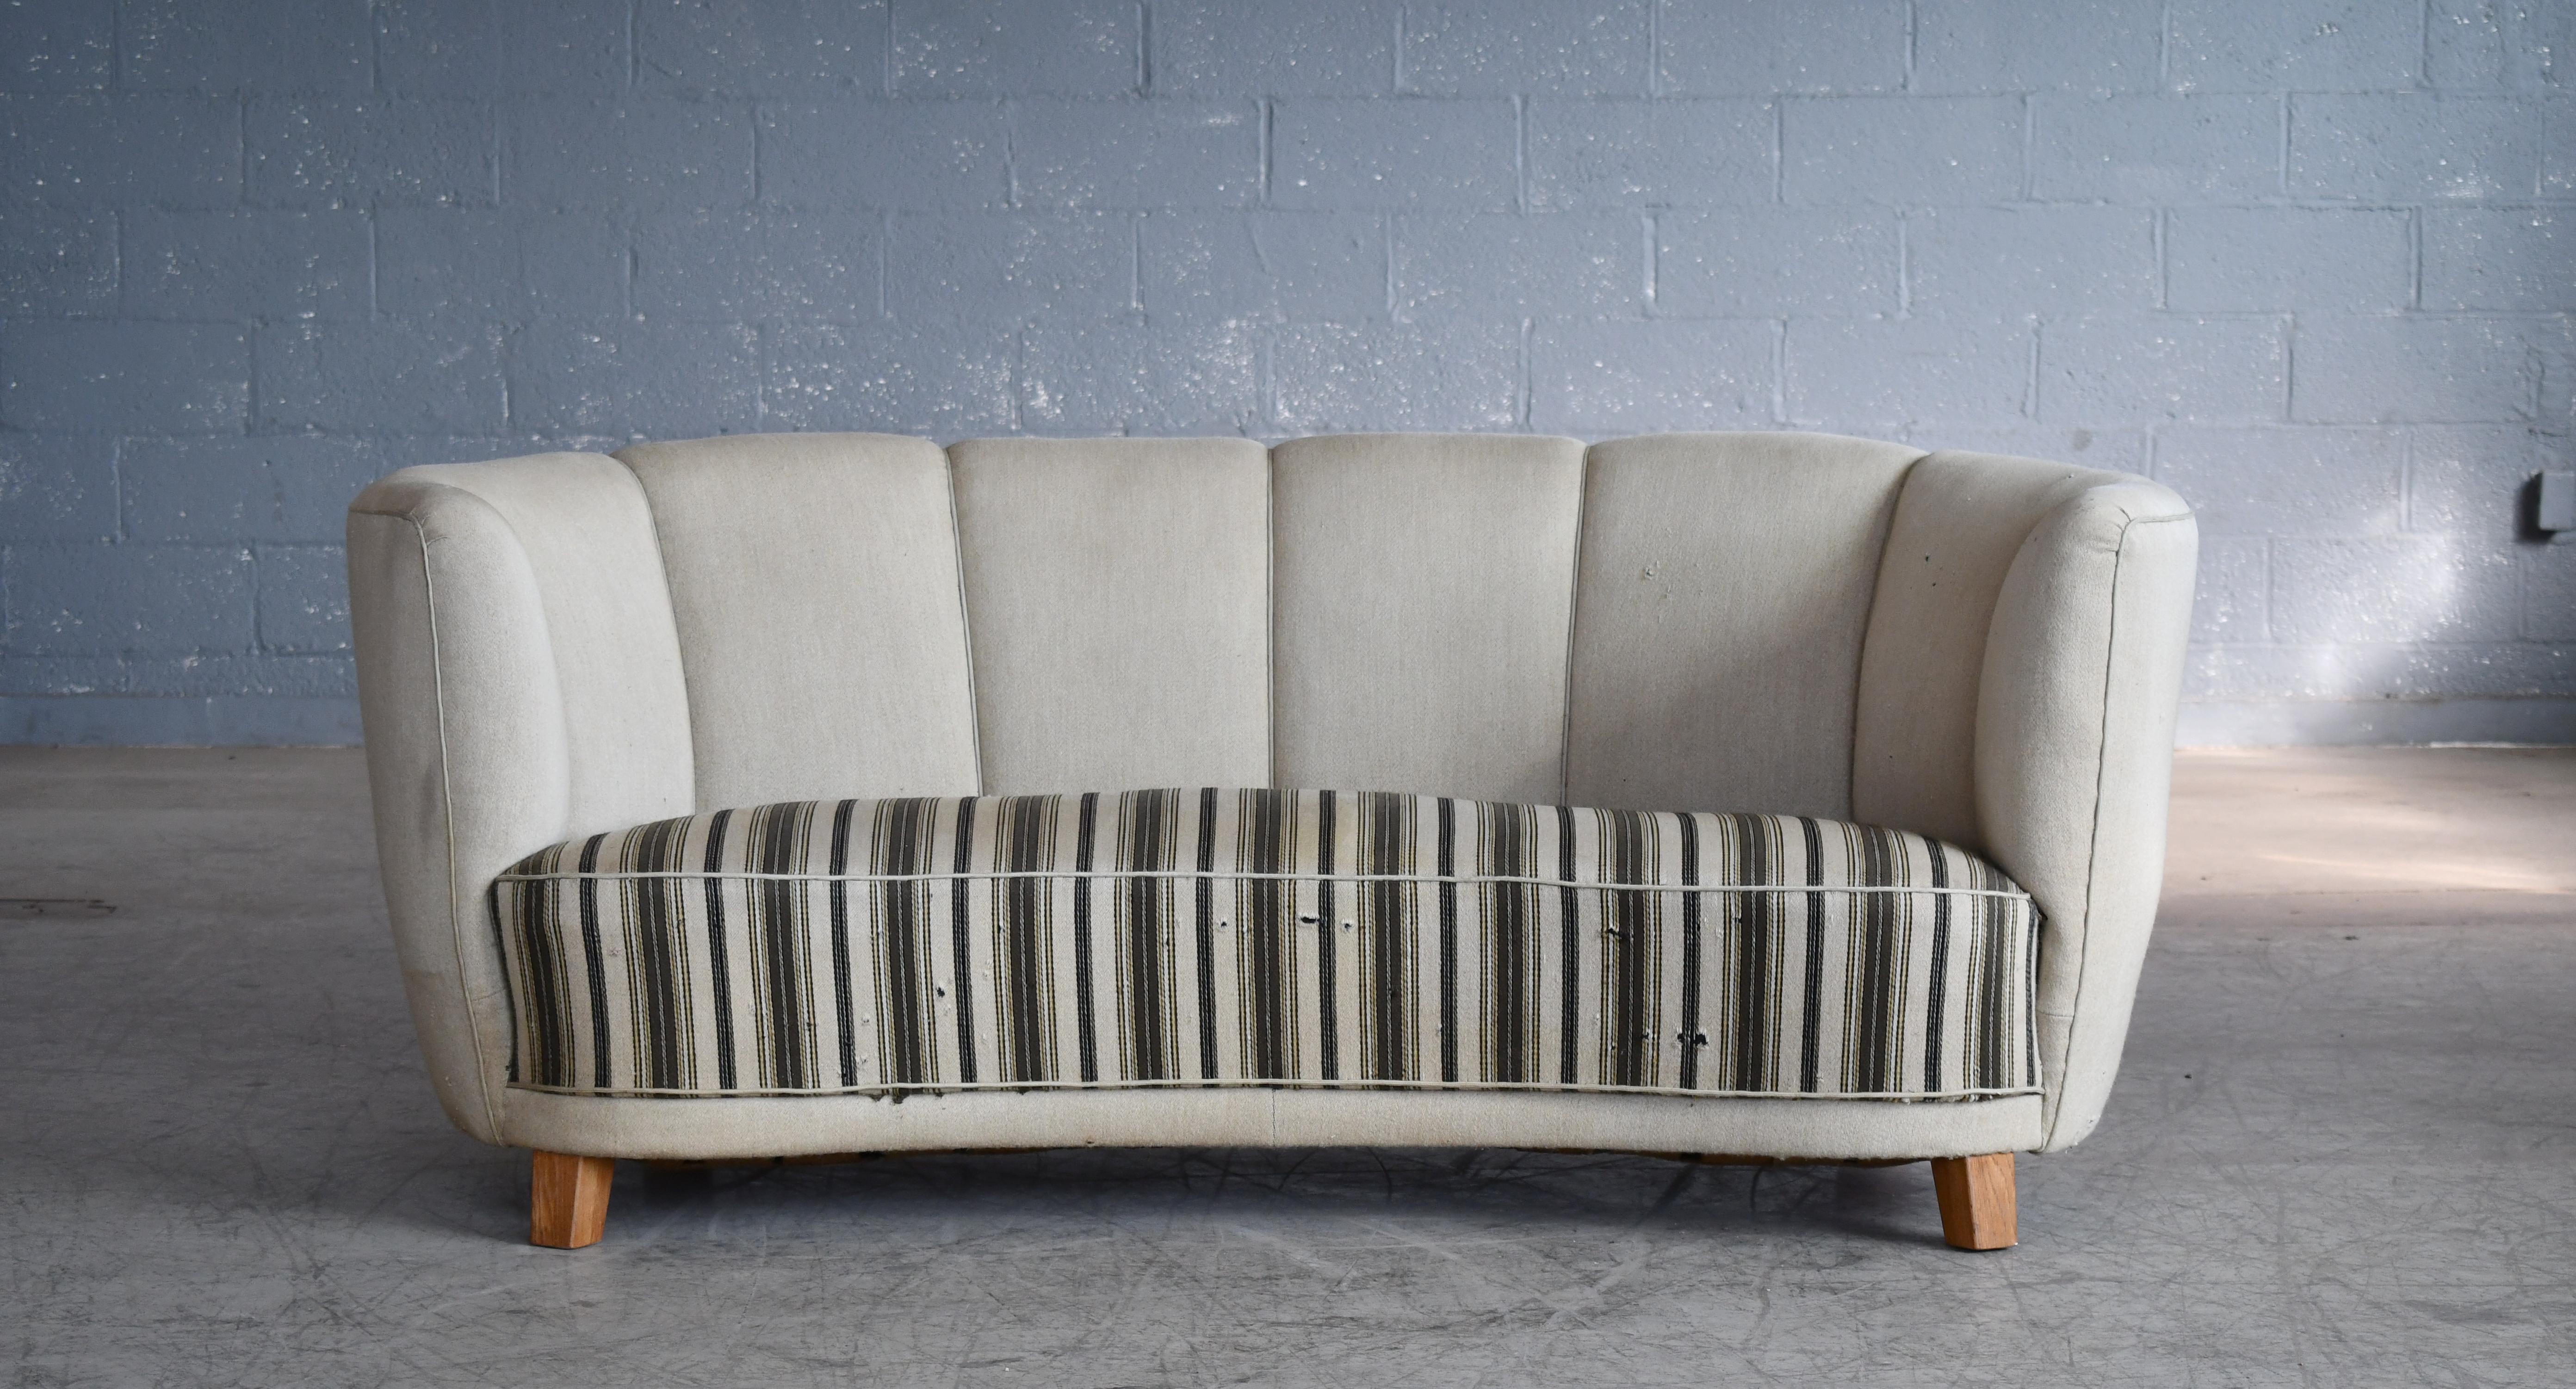 Beautiful and very elegant Danish 1940s curved two-seat sofa raised on a beech frame and legs. Solid construction with springs in the seat and the backrest for support and cushioning. The sofa was re-upholstered in recent years and the fabric is in